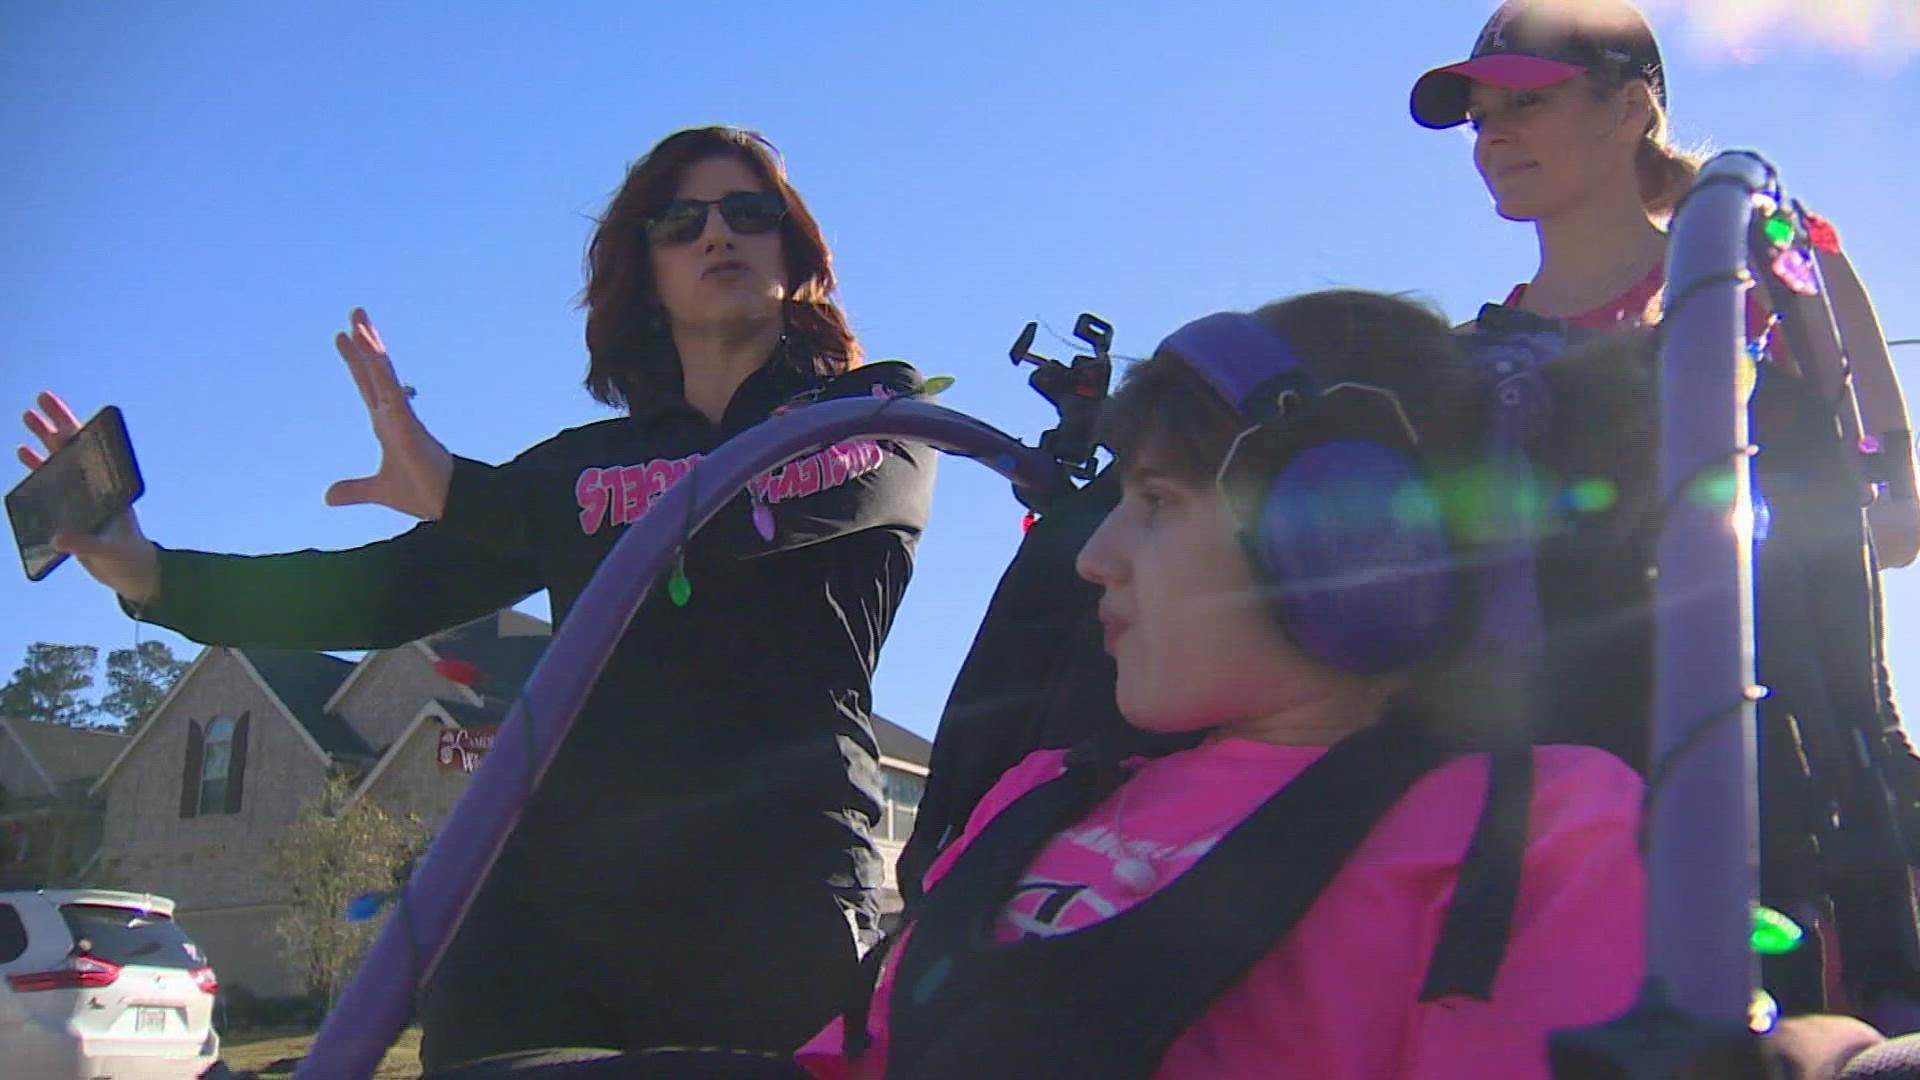 The nonprofit Ainsley's Angels is coordinating 19 teams of seasoned runners pushing disabled participants in special wheelchairs dubbed chariots.